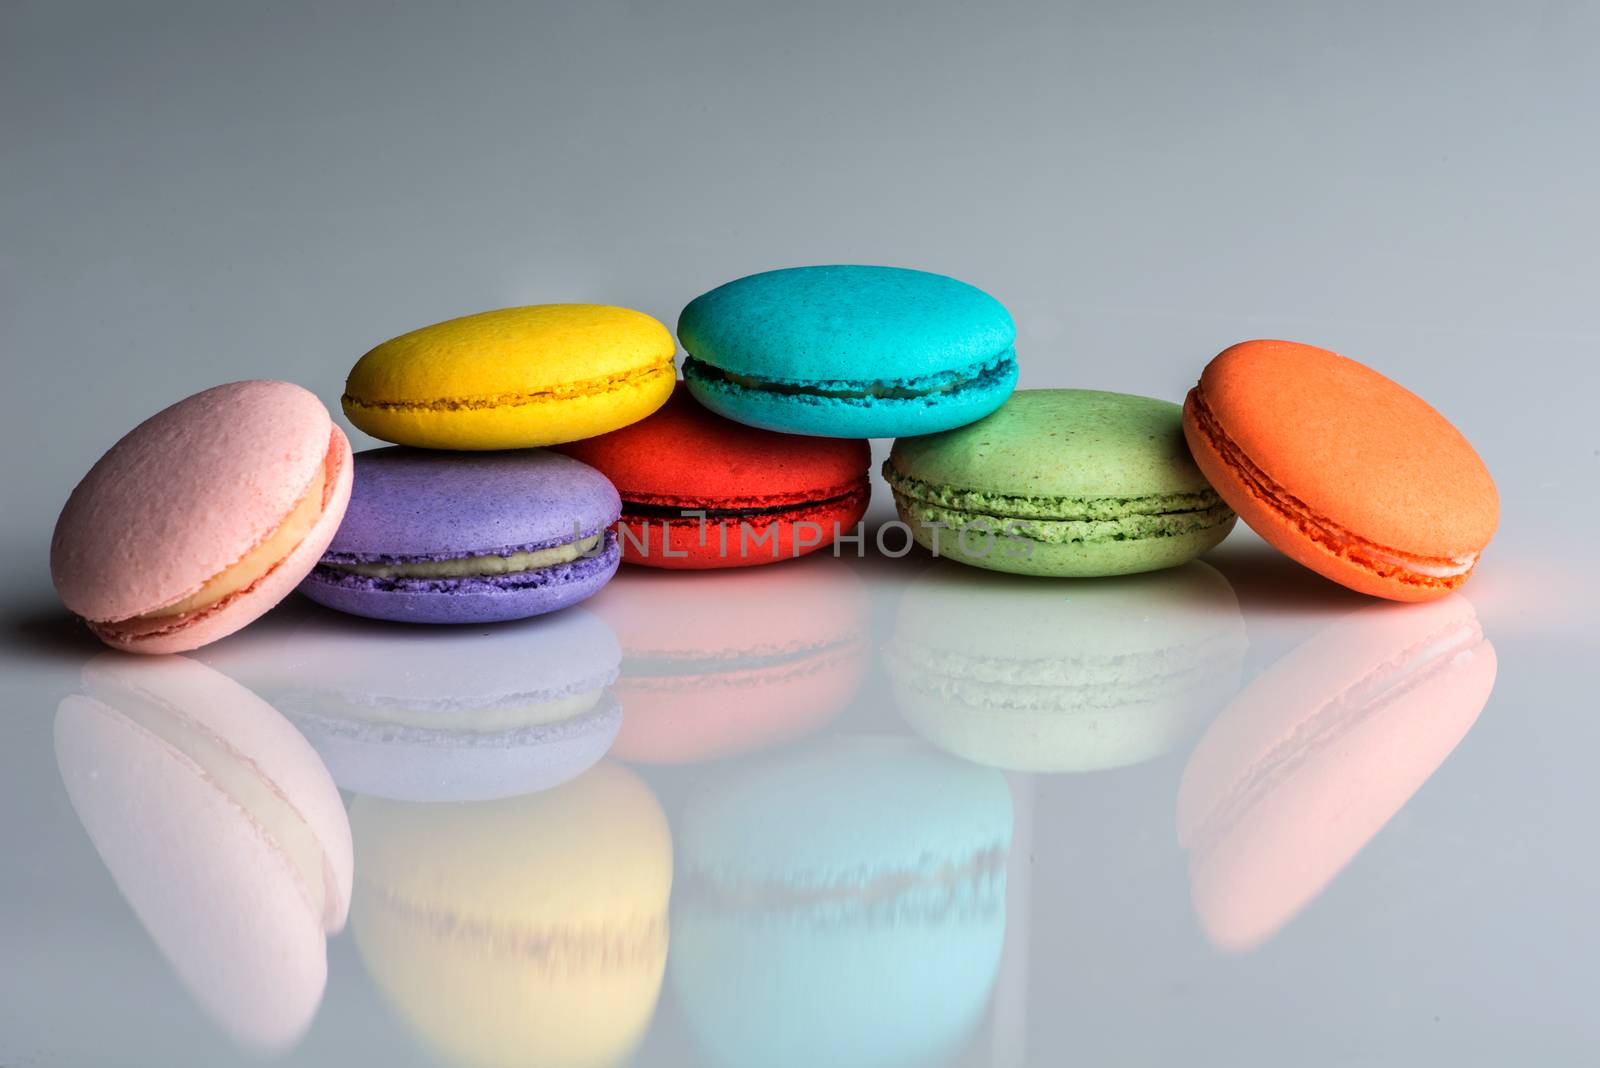 Multi colored macaroons by gregory21